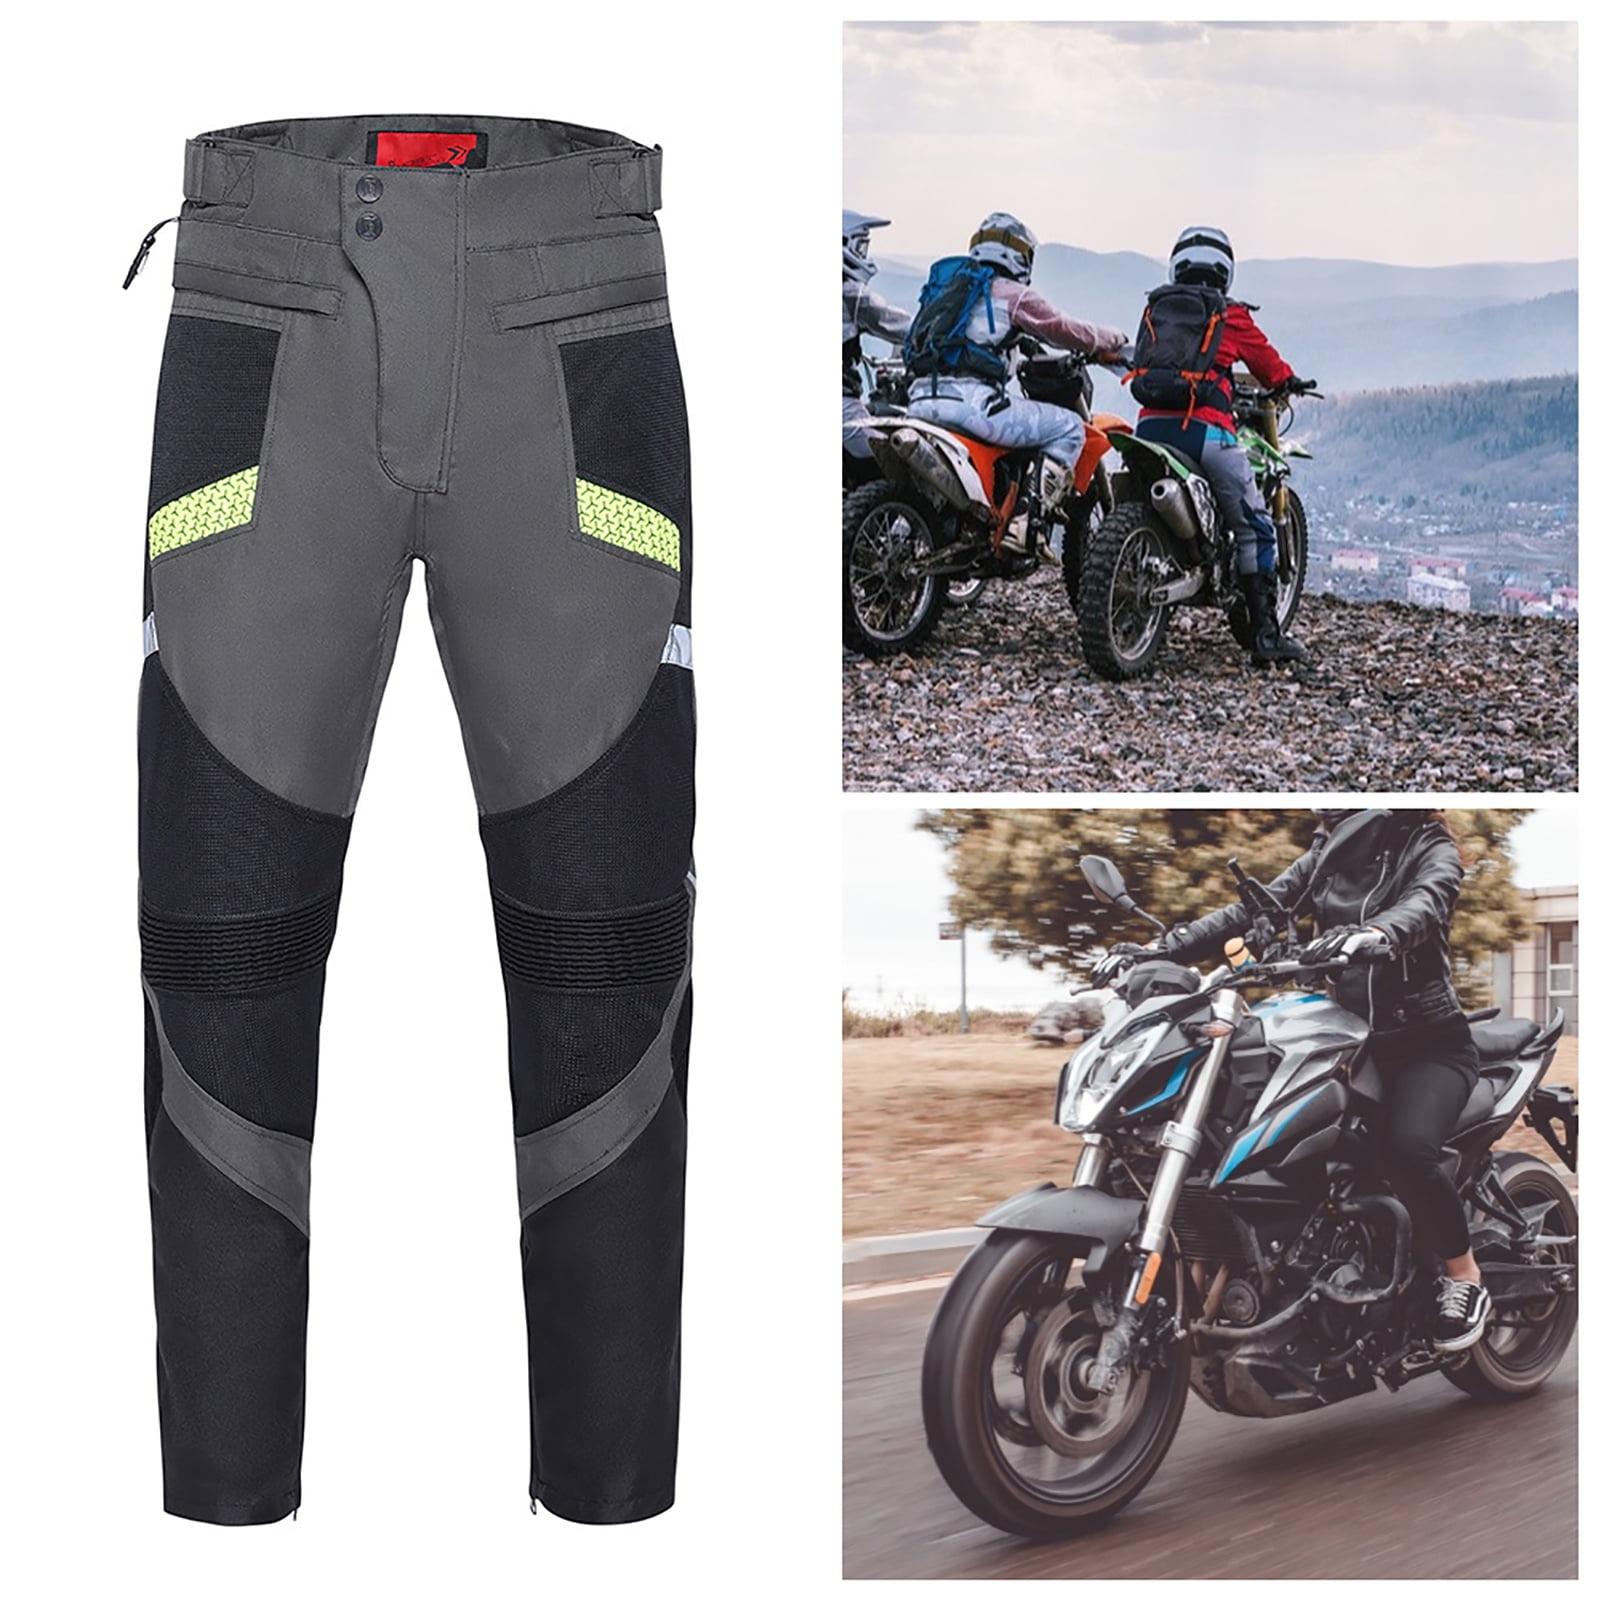 Trousers | Motorcycle Clothing | Infinity Motorcycles